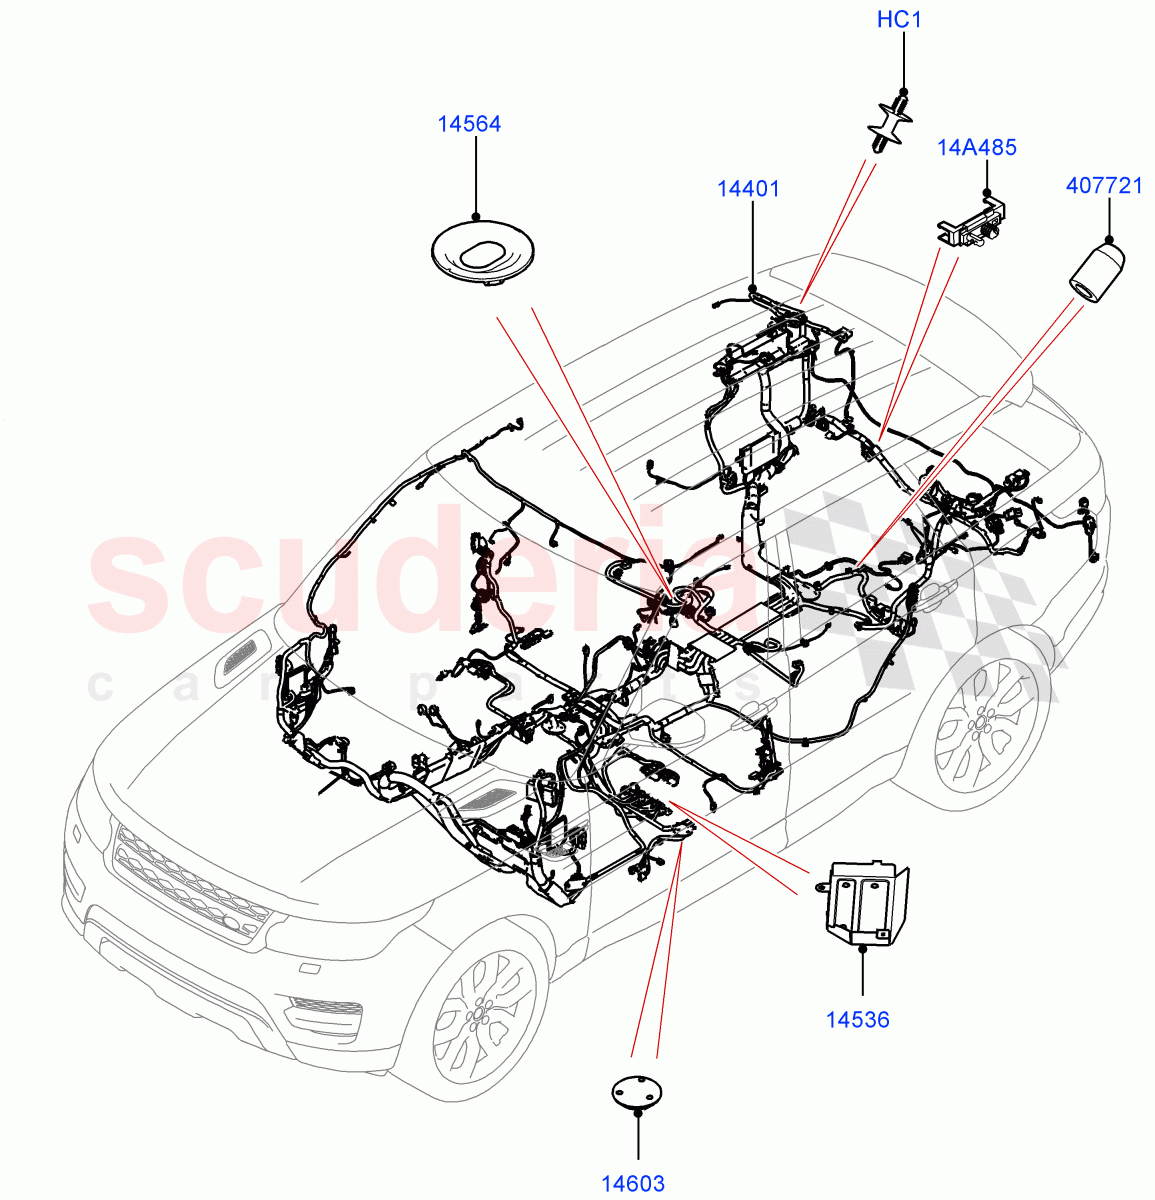 Electrical Wiring - Engine And Dash(Main Harness)((V)TOEA999999) of Land Rover Land Rover Range Rover Sport (2014+) [2.0 Turbo Petrol AJ200P]